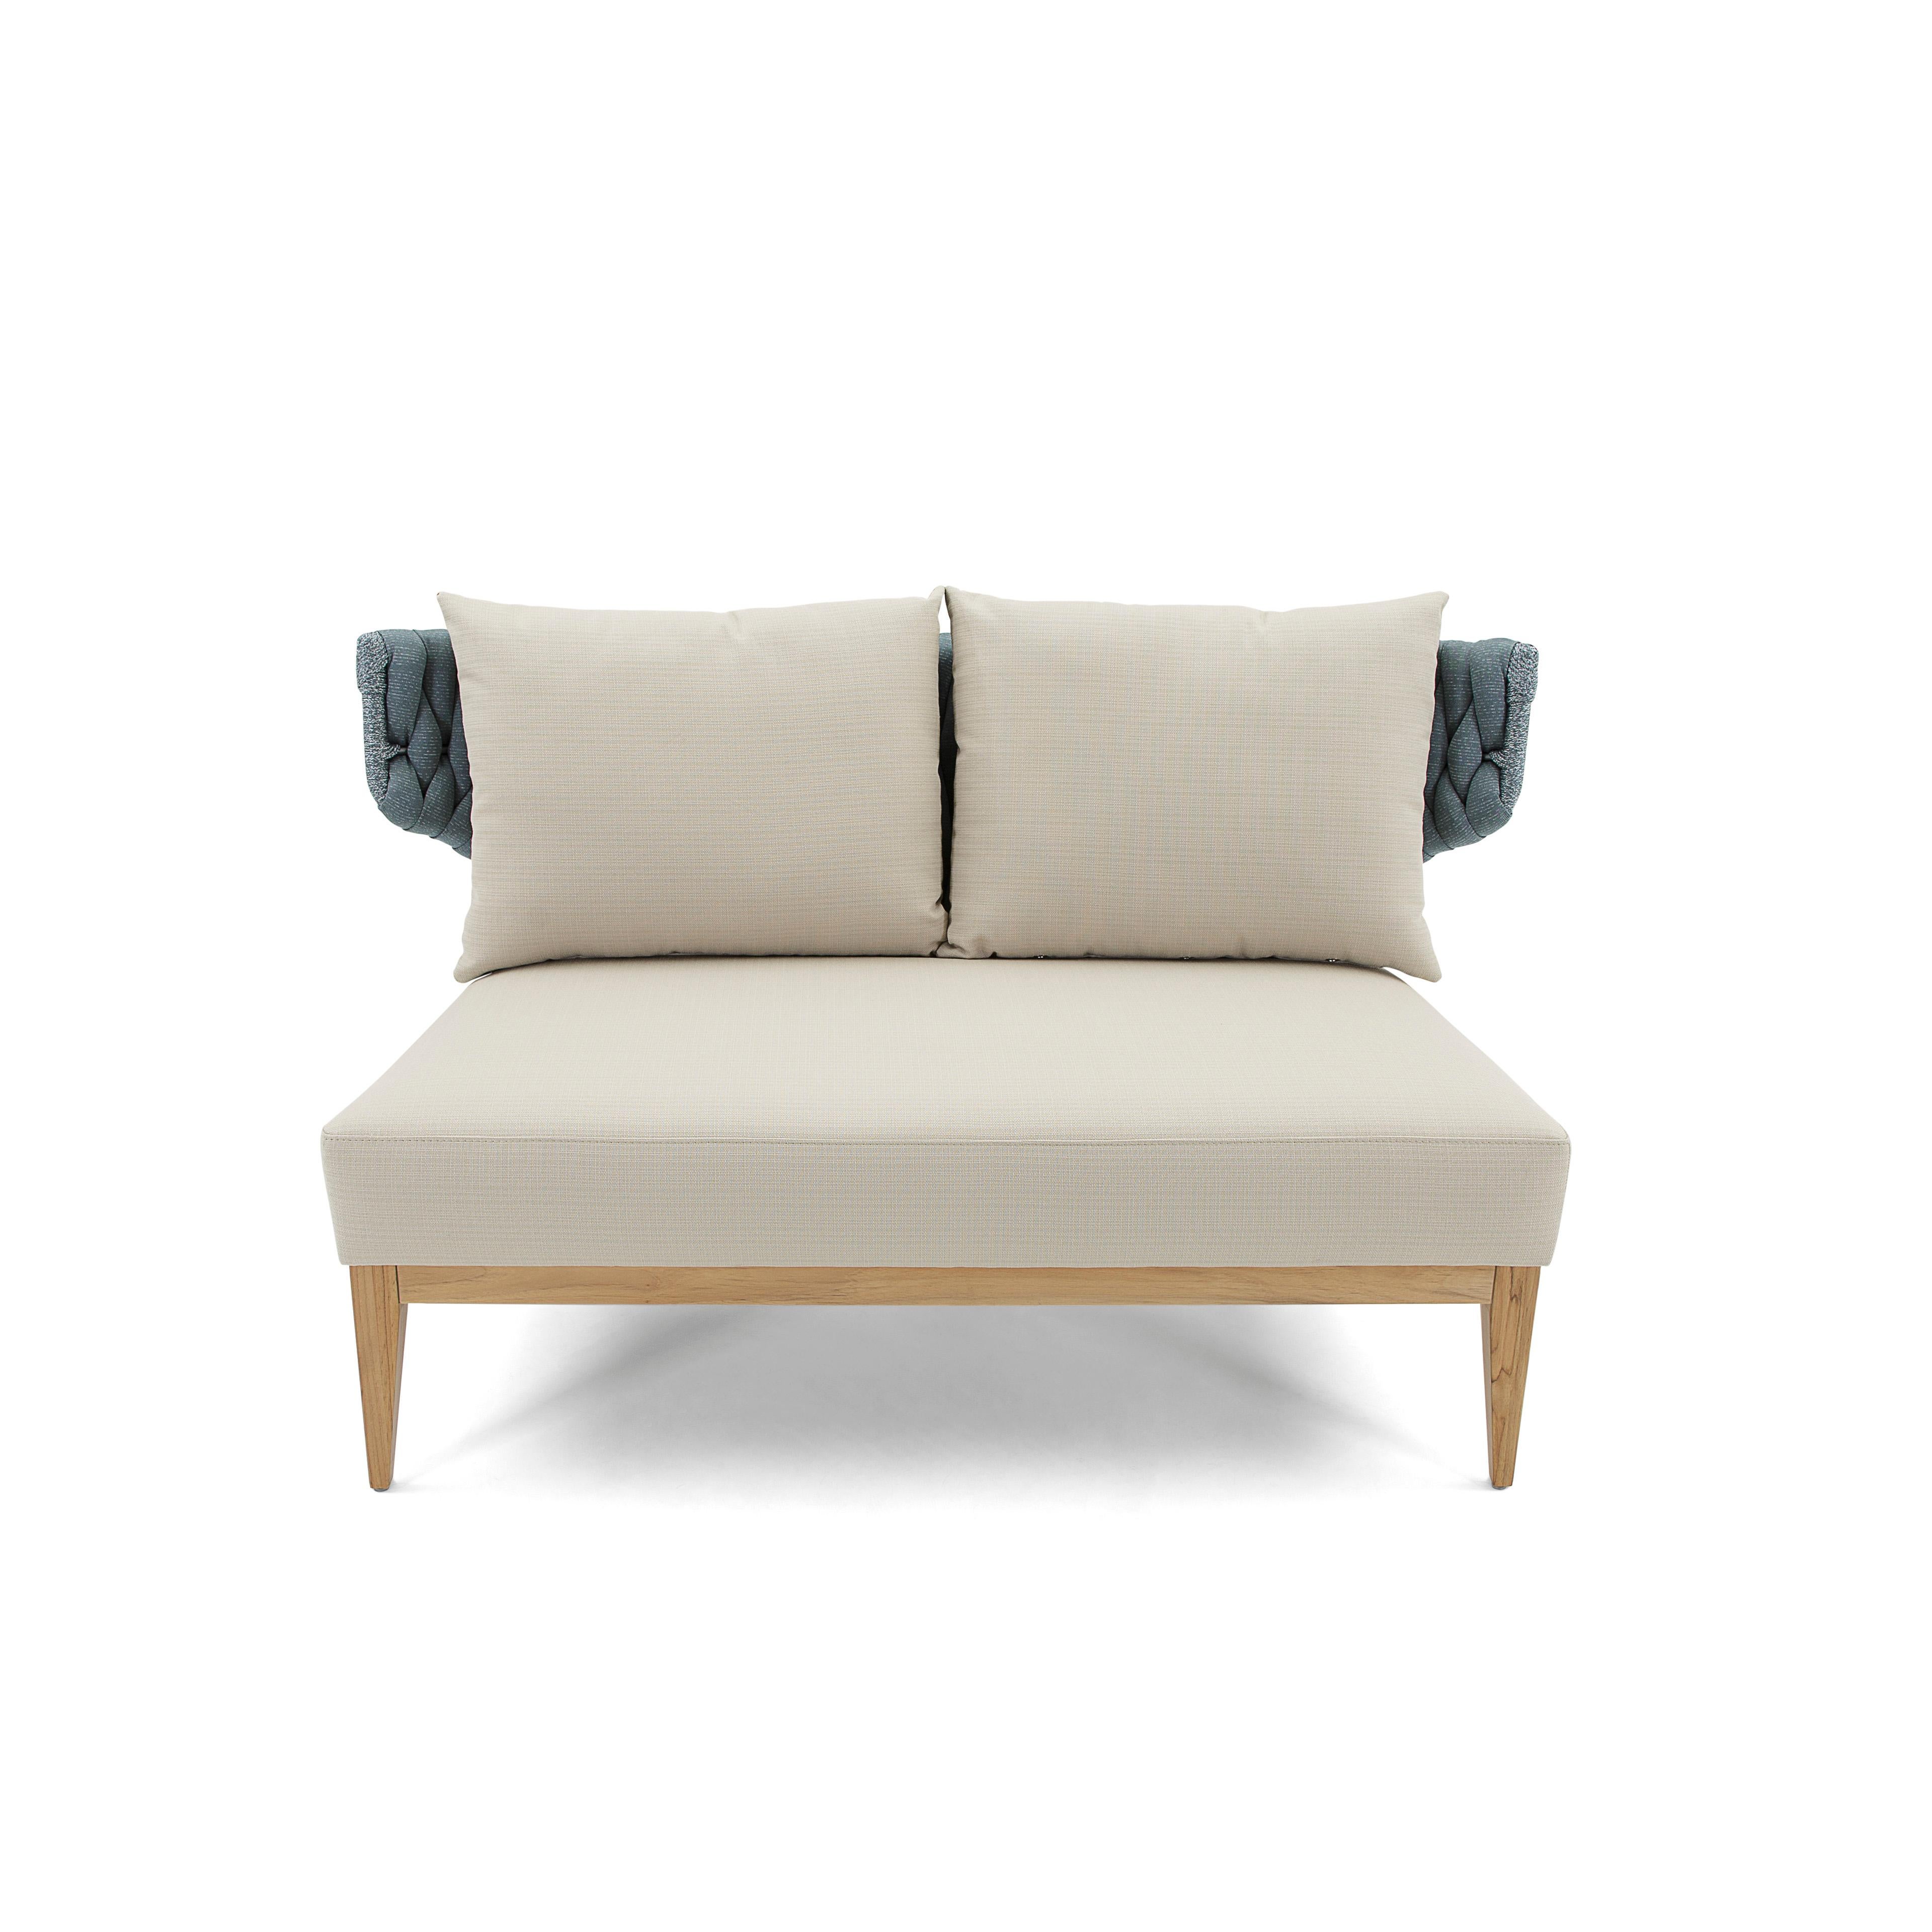 Contemporary Beluga Outdoor Loveseat in Beige and Blue fabric and Teak wood For Sale